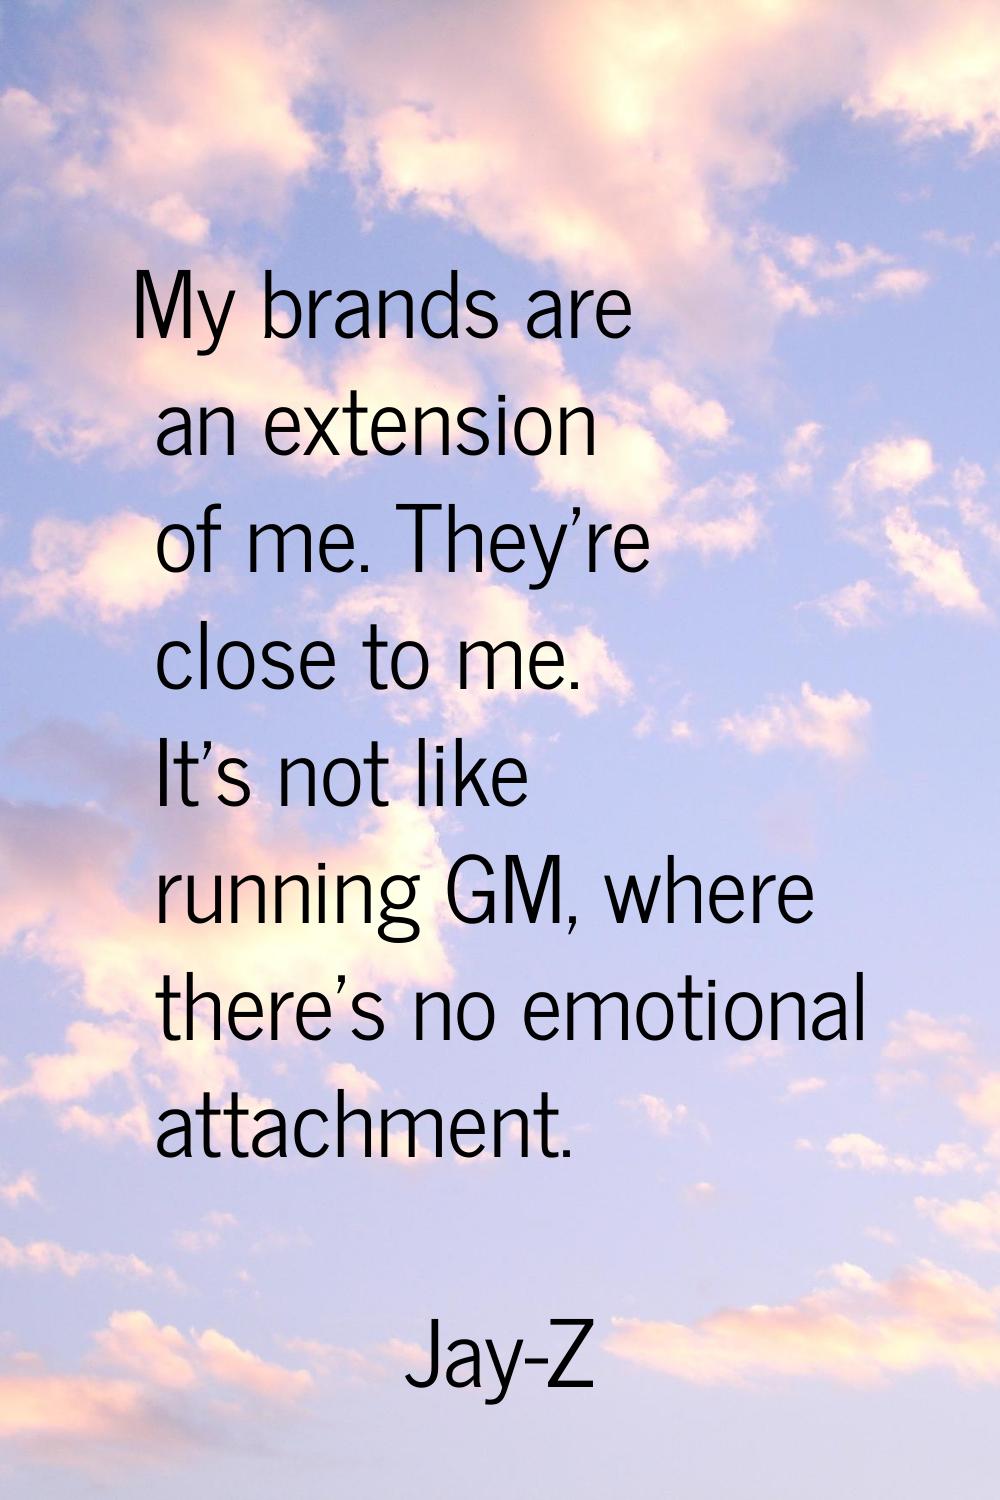 My brands are an extension of me. They're close to me. It's not like running GM, where there's no e